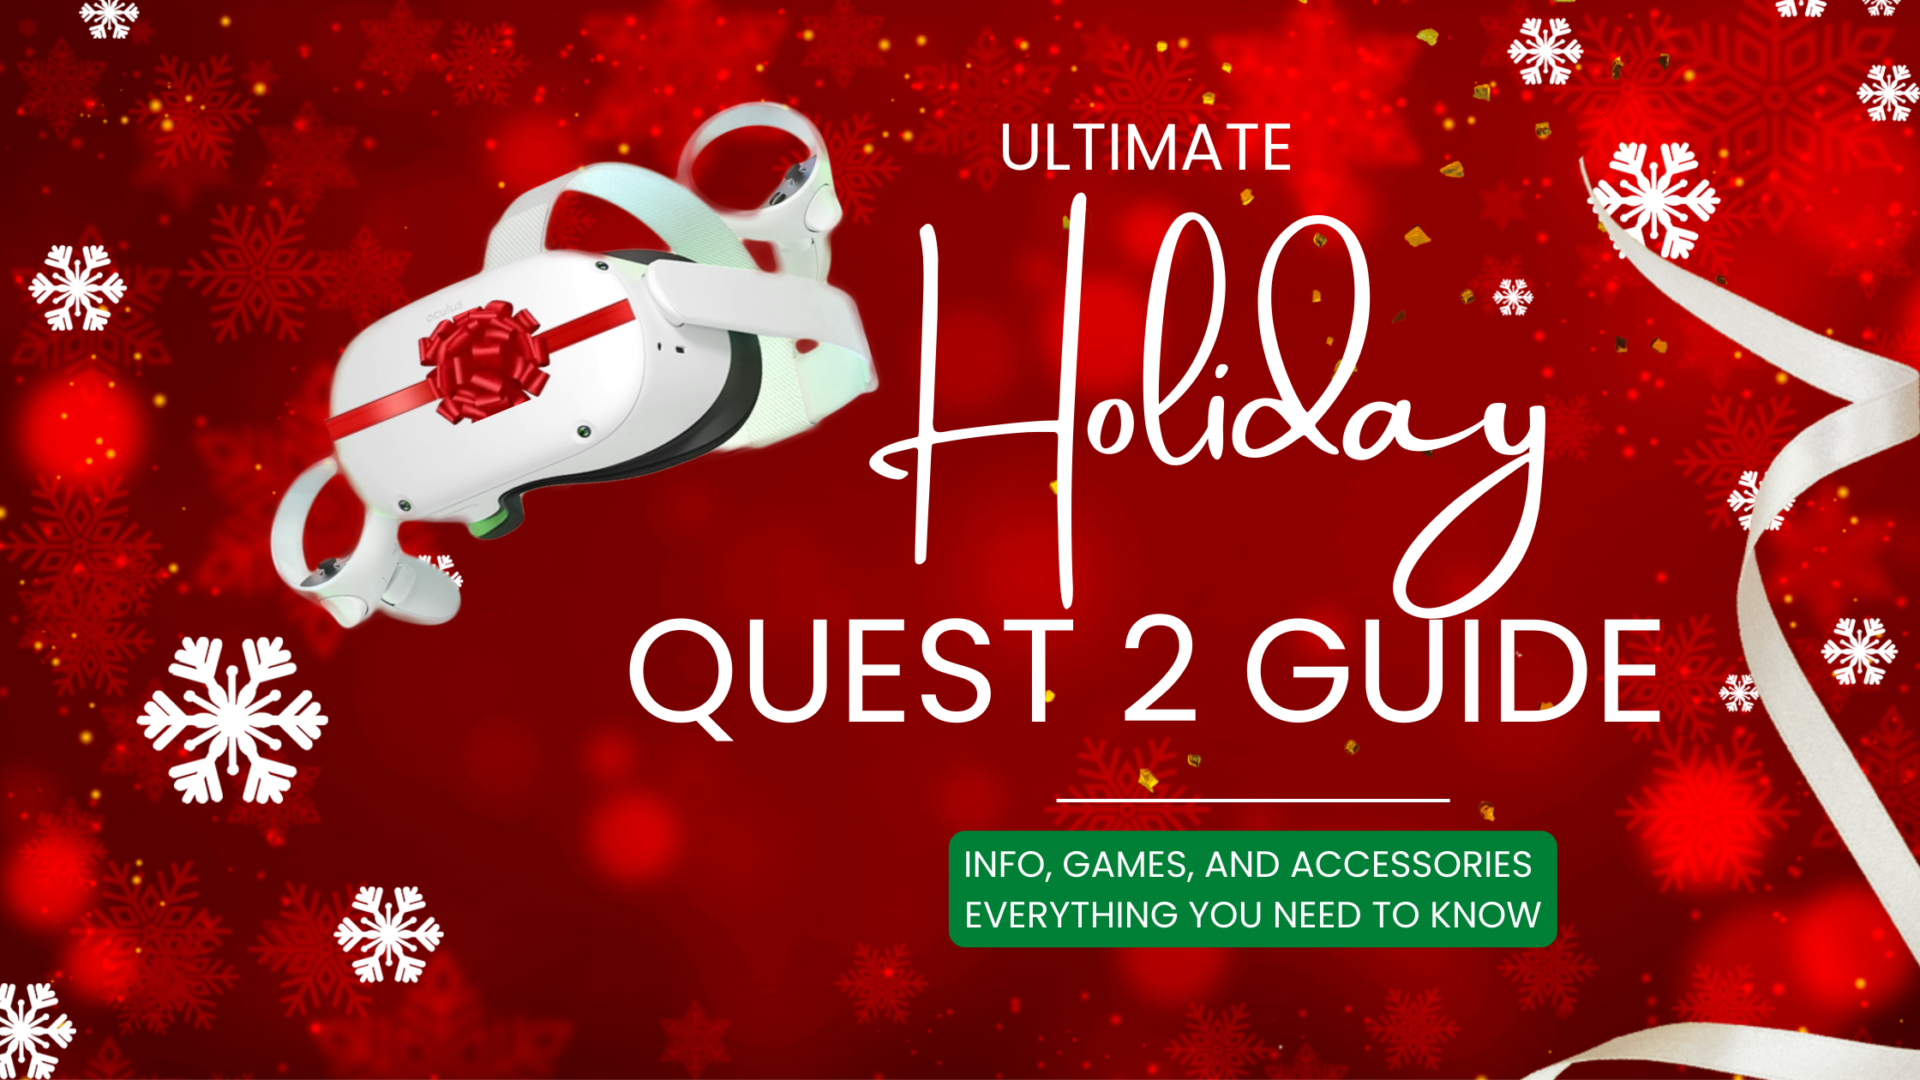 Ultimate Quest 2 Guide - Ultimate Quest 2 Guide - Info, Games, and Accessories